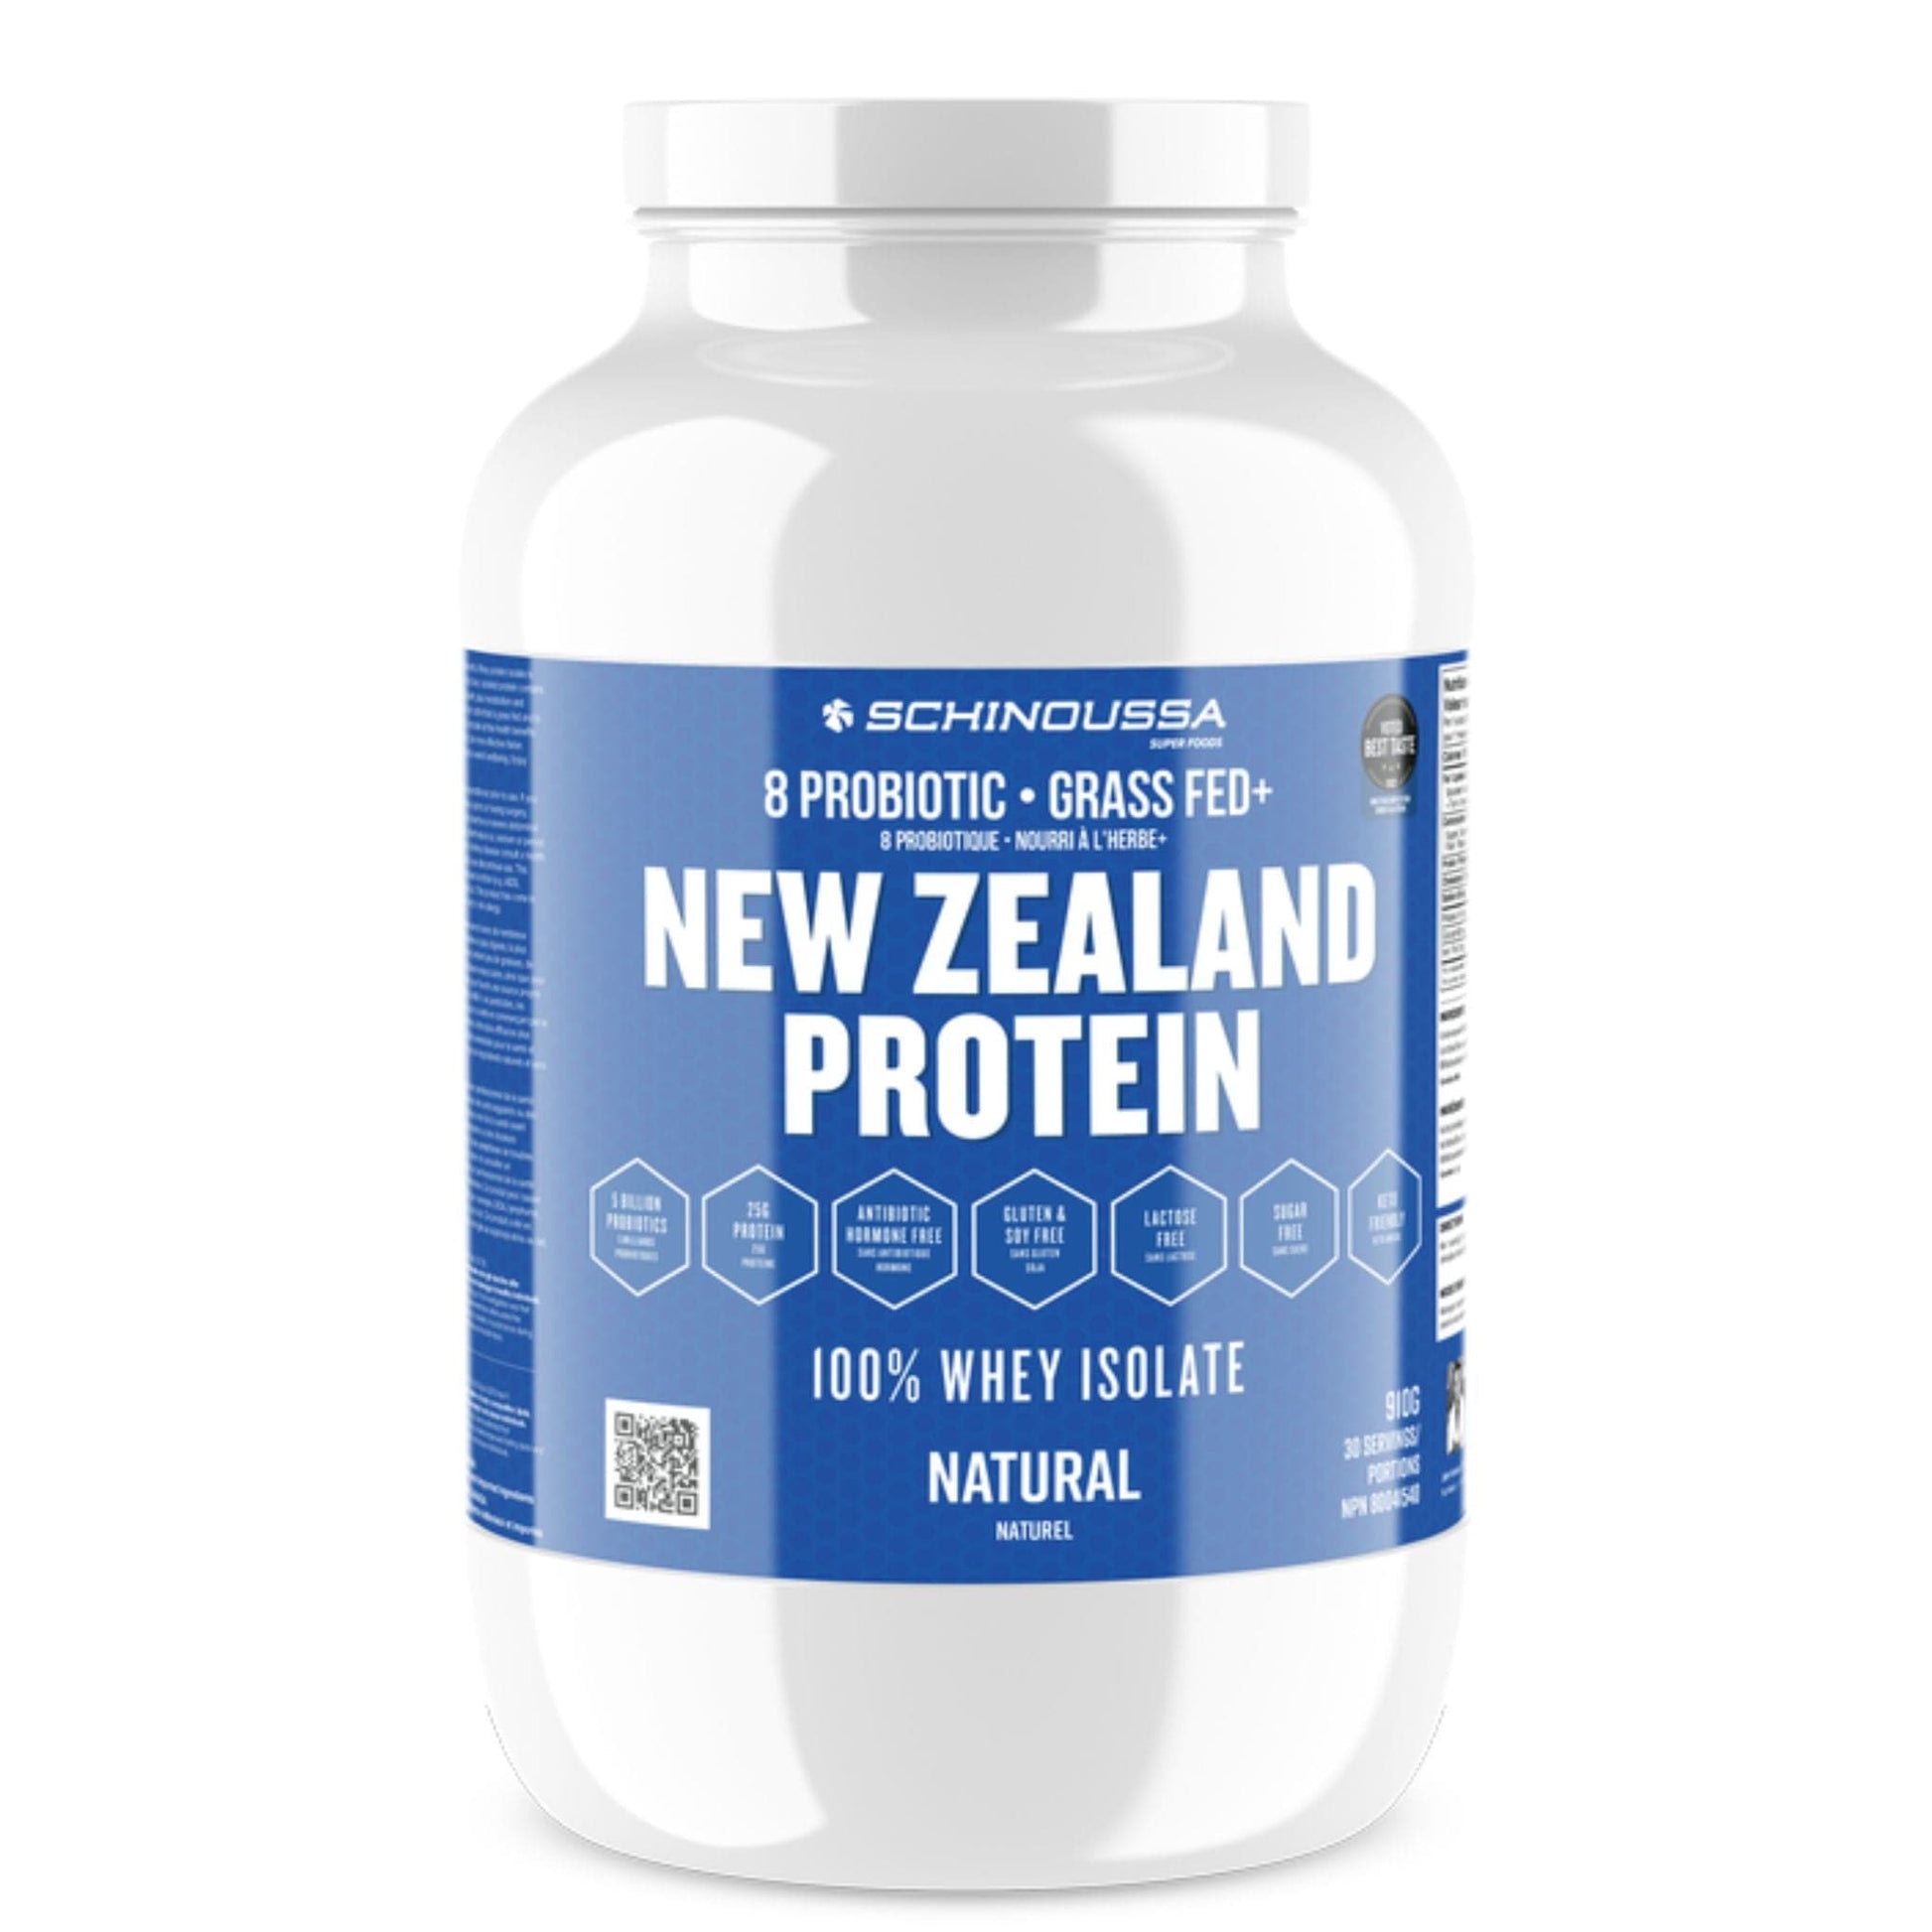 Natural | Schinoussa New Zealand Protein 8 Probiotic 100% Whey Isolate // Natural flavour